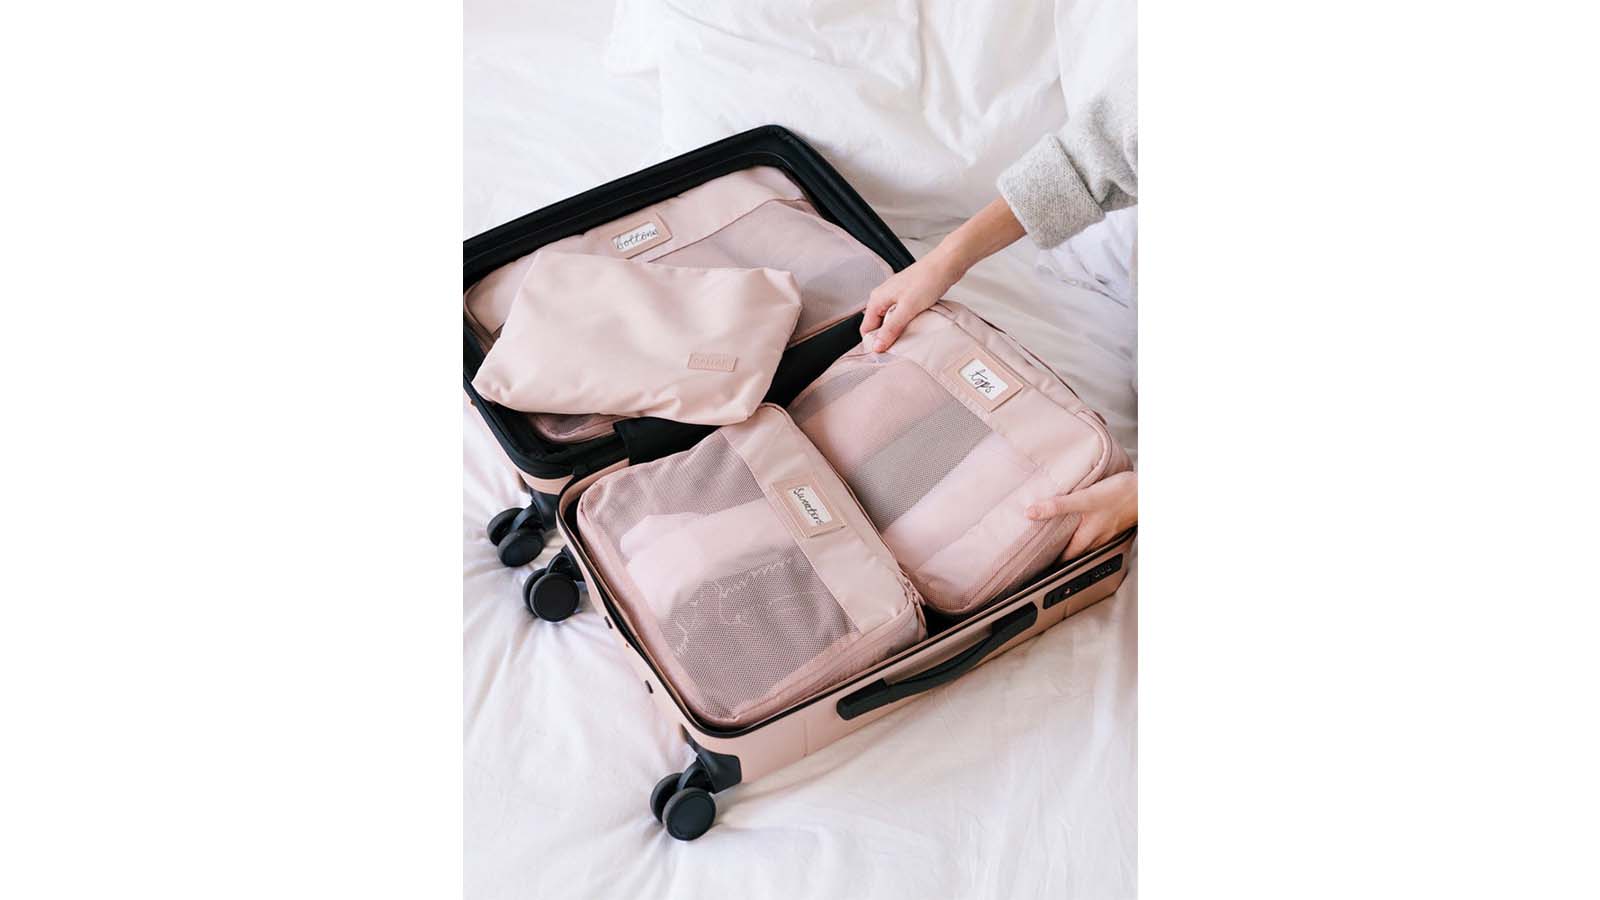 5 best packing cubes, according to experts